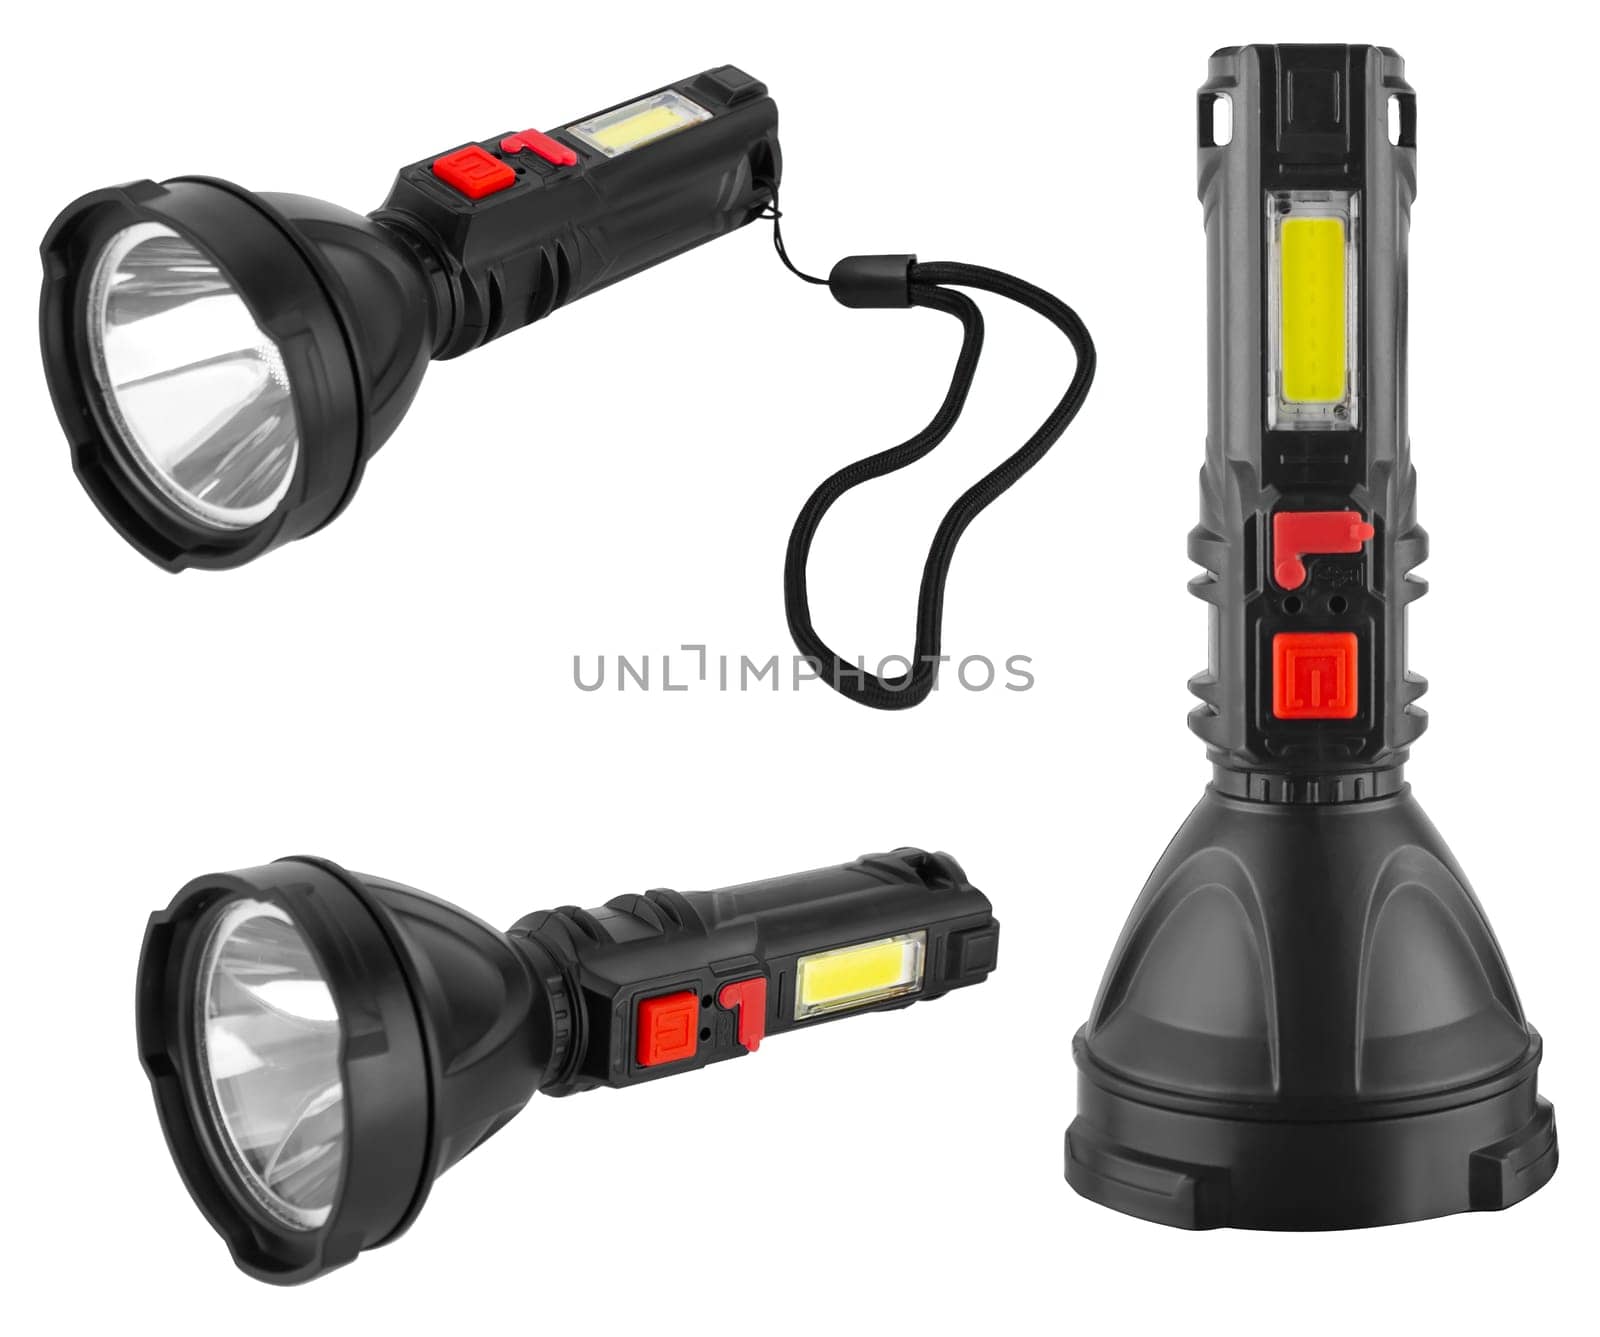 battery-powered flashlight, hand-held, on a white background by A_A